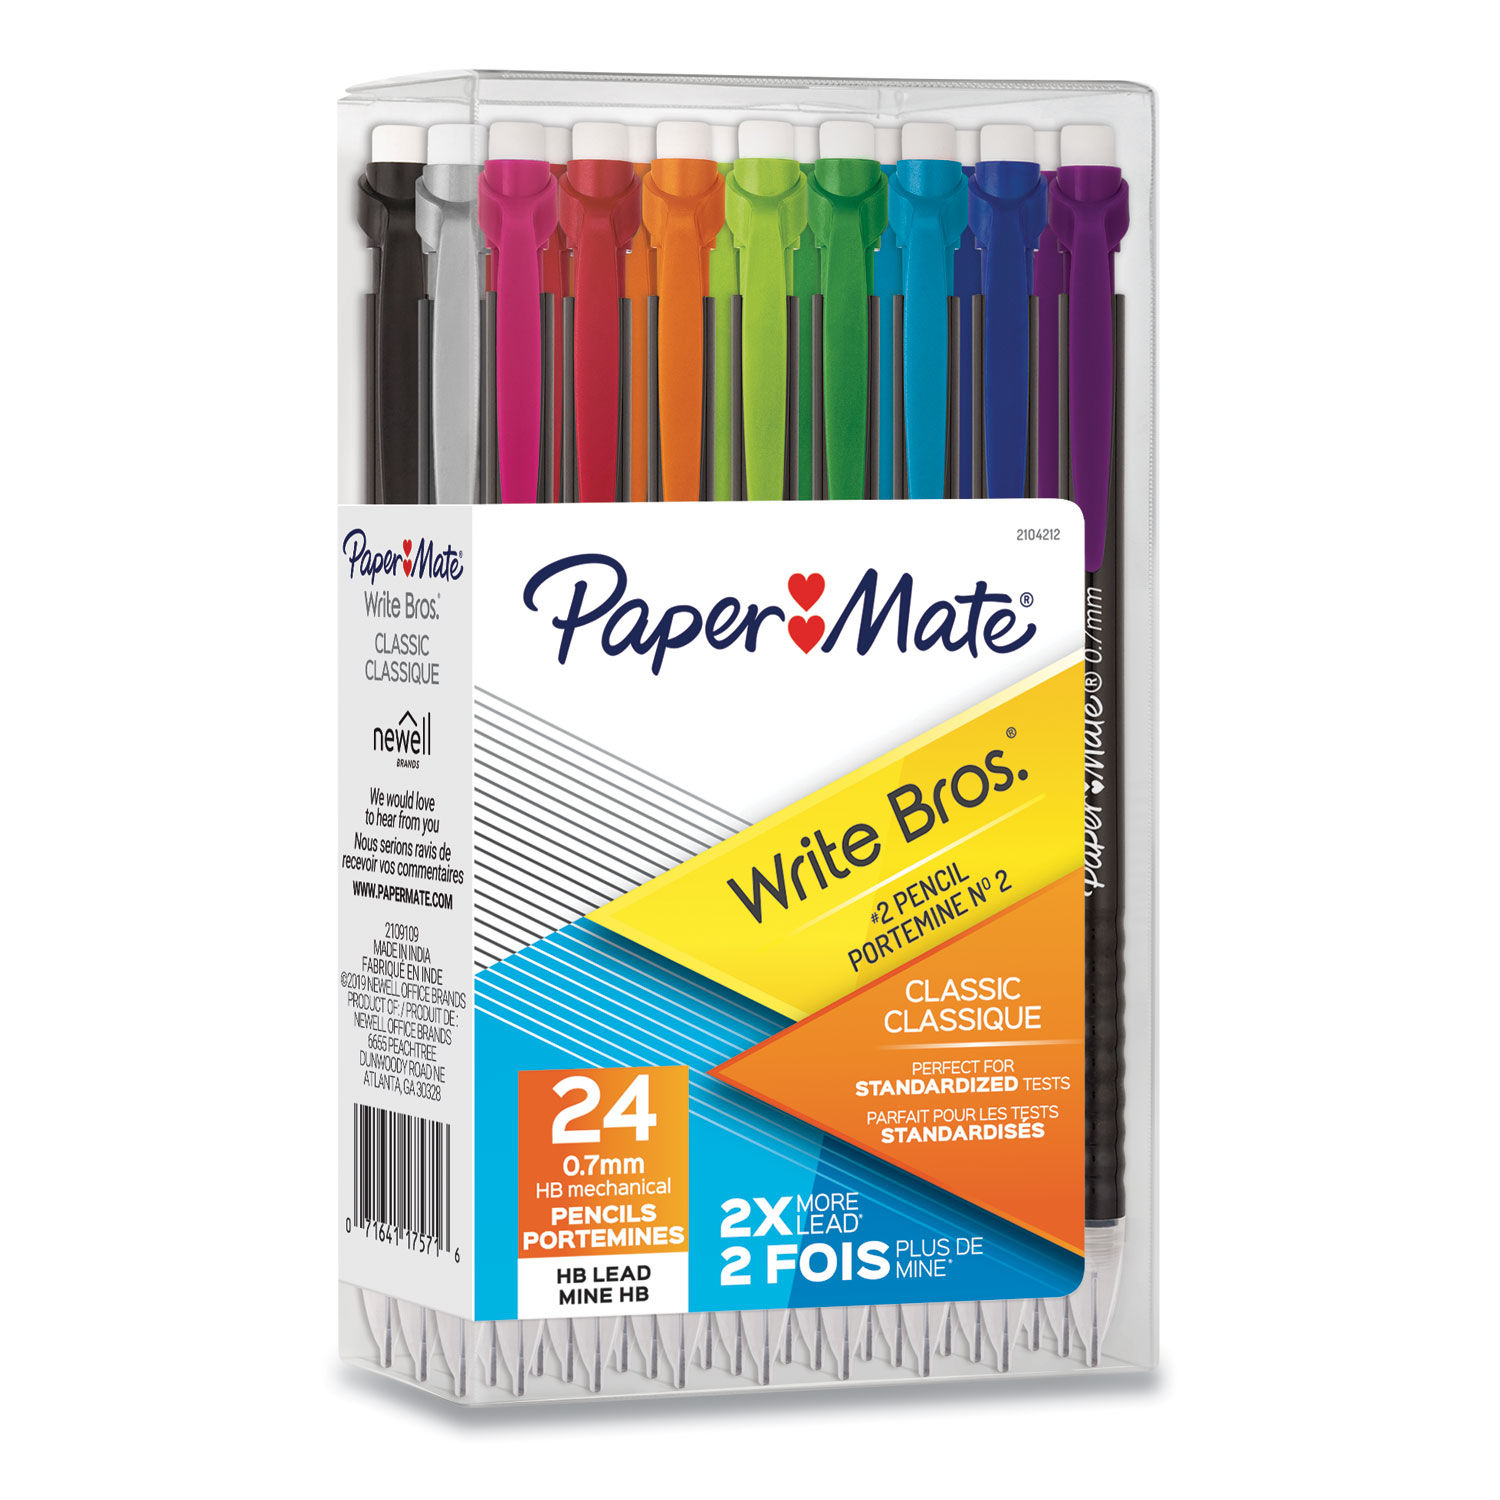 Write Bros Mechanical Pencil 0.7 mm, HB (#2), Black Lead, Black Barrel with Assorted Clip Colors, 24/Pack